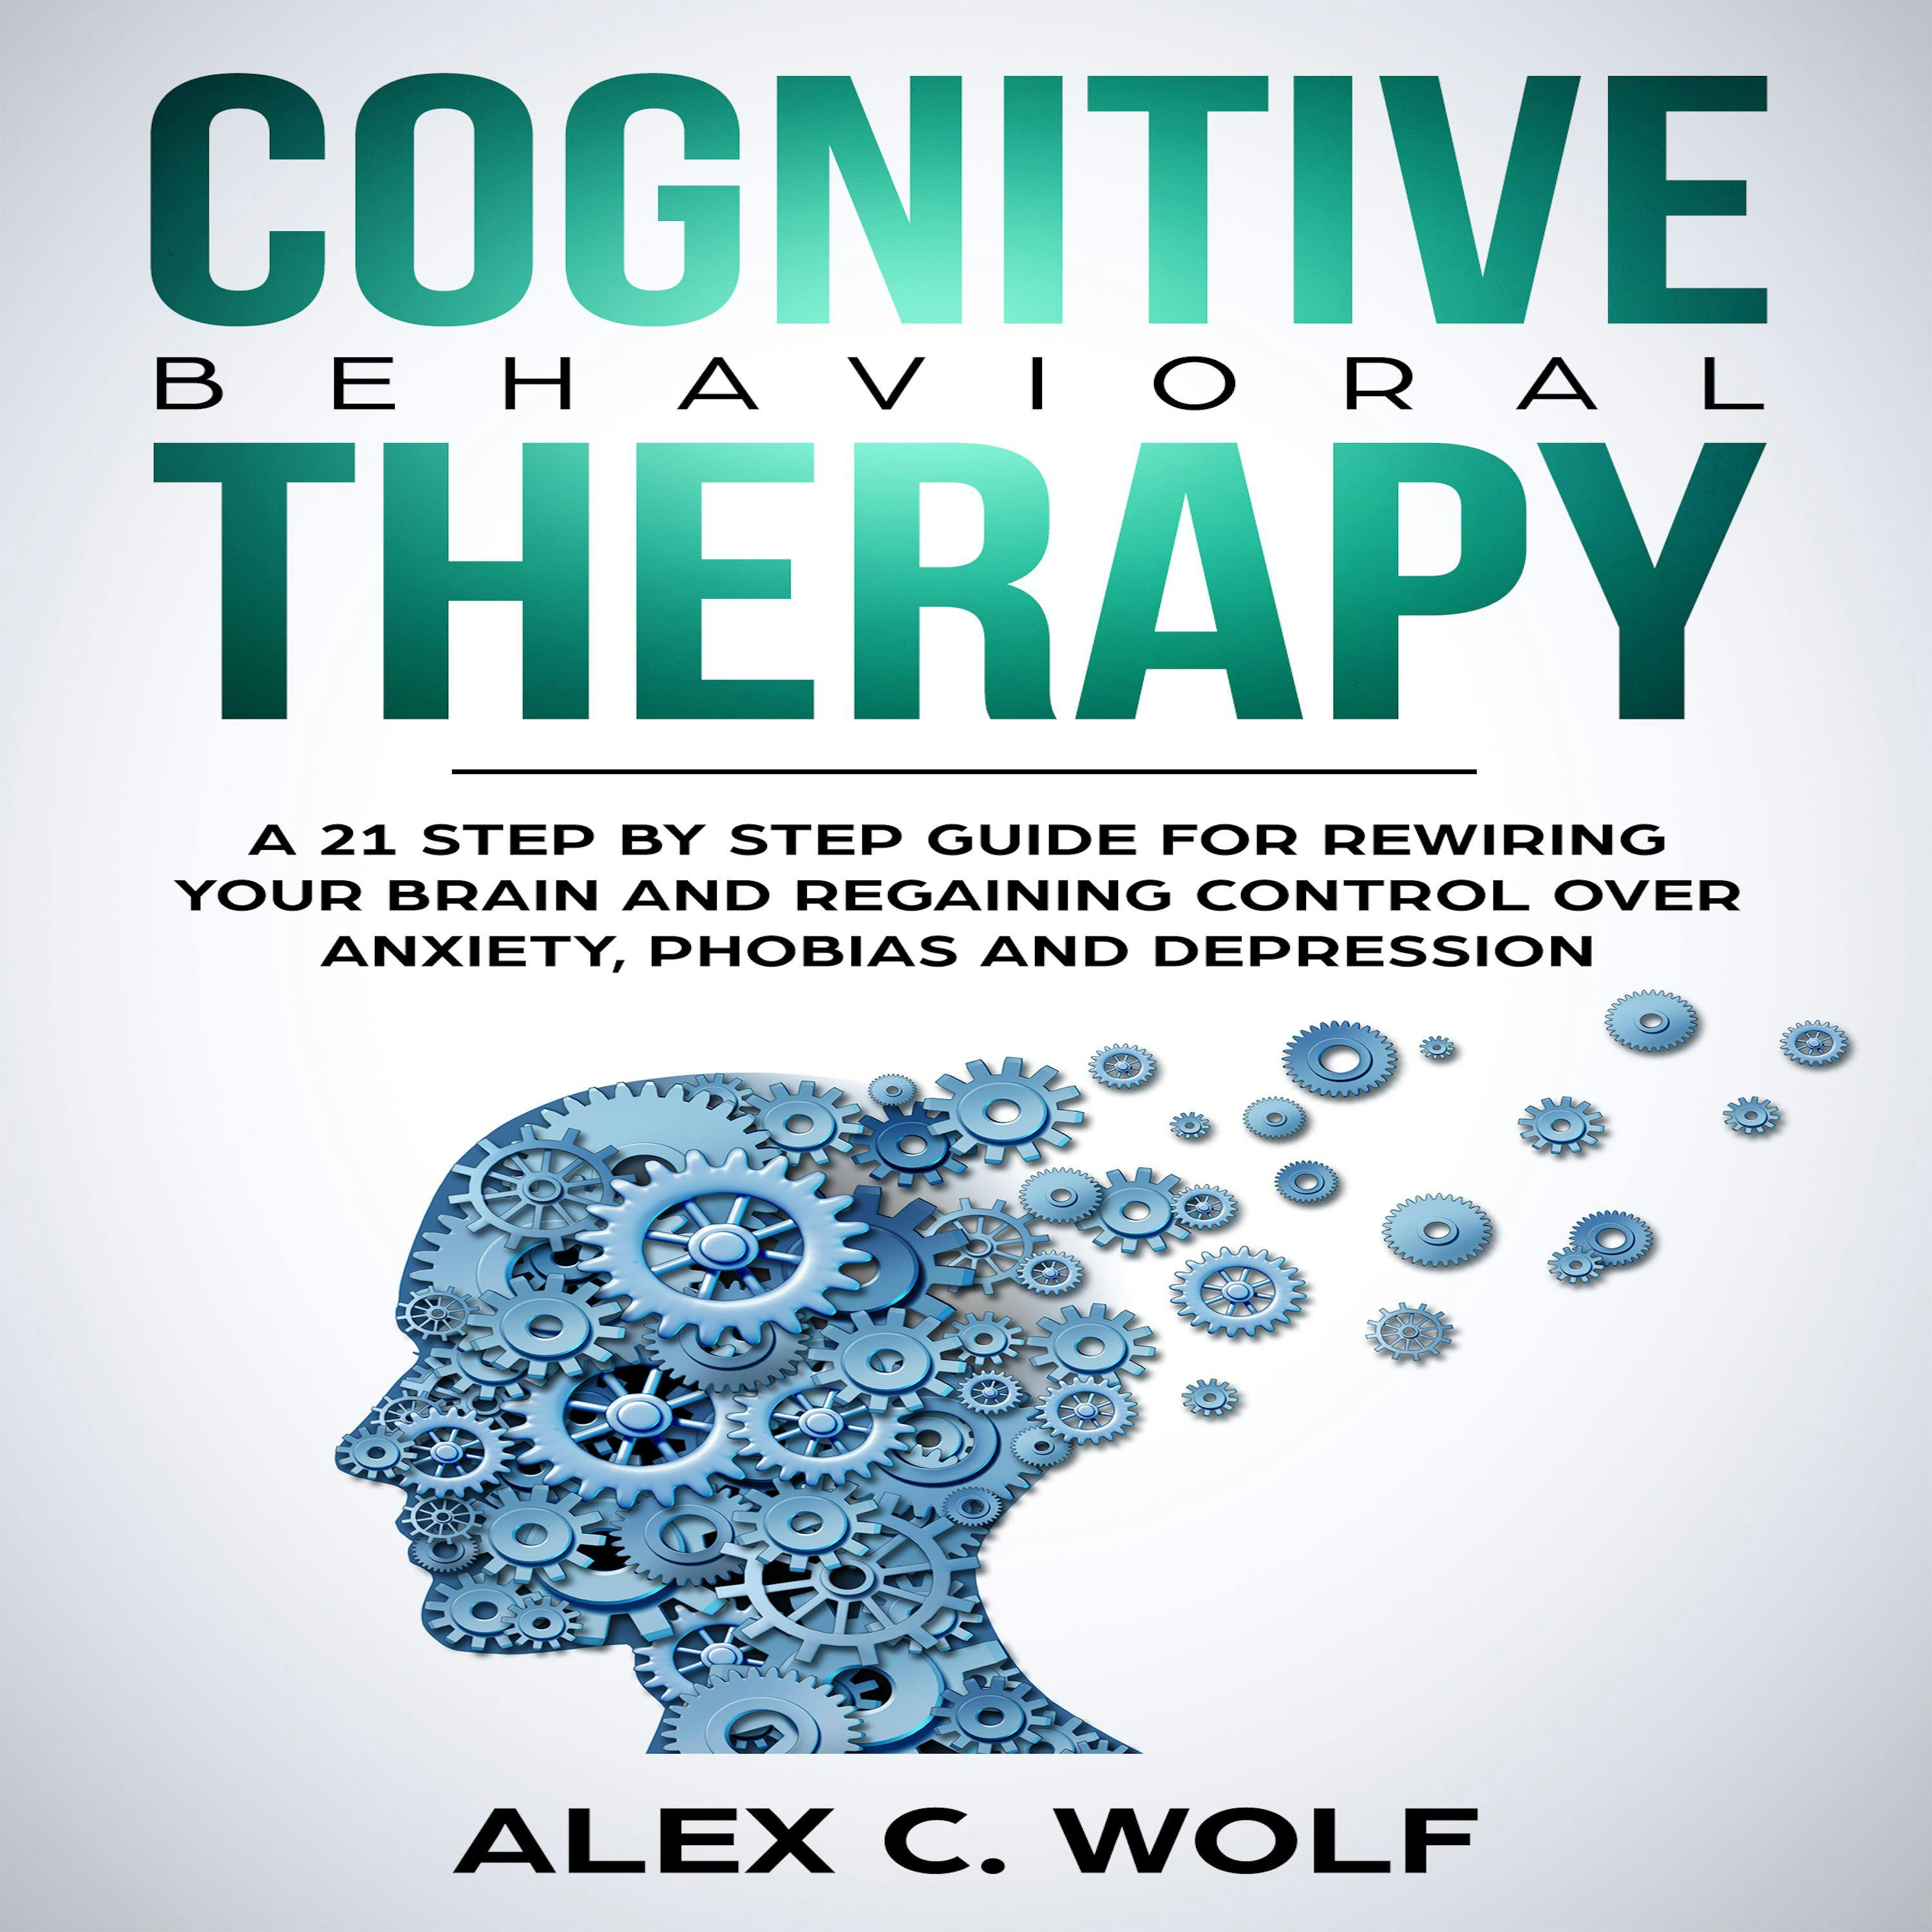 Cognitive Behavioral Therapy: A 21 Step by Step Guide for Rewiring your Brain and Regaining Control Over Anxiety, Phobias, and Depression - Alex C. Wolf